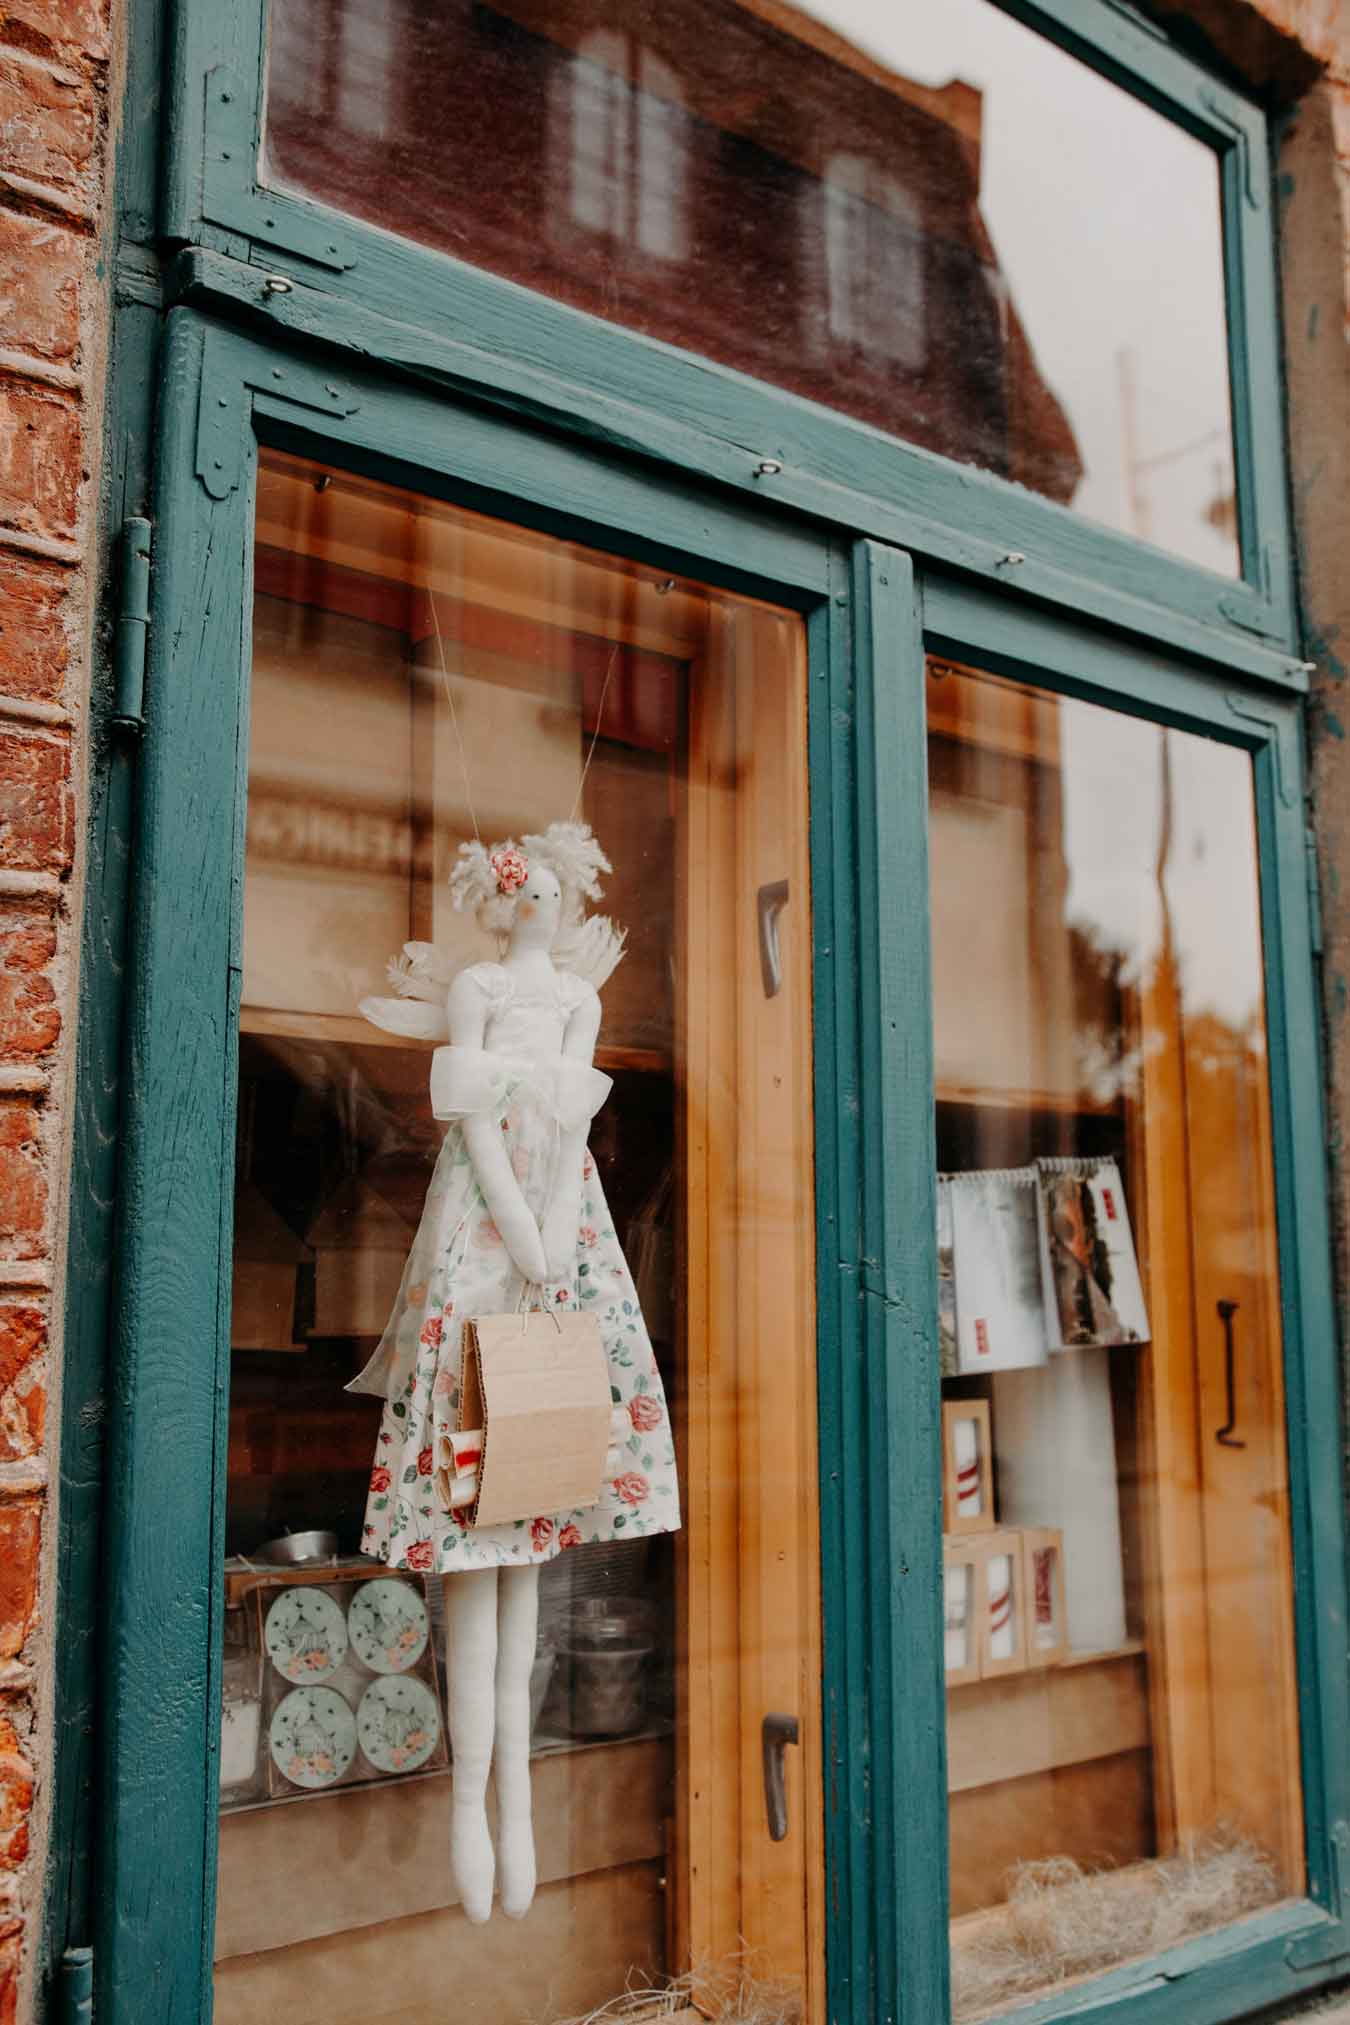 Value of value, sustainable fashion, boutique, value of boutique, unique clothing experience, physical retail shop, ethical shopping, shopping small, history of boutique, ethical clothing, apparel store, customer experience, small business